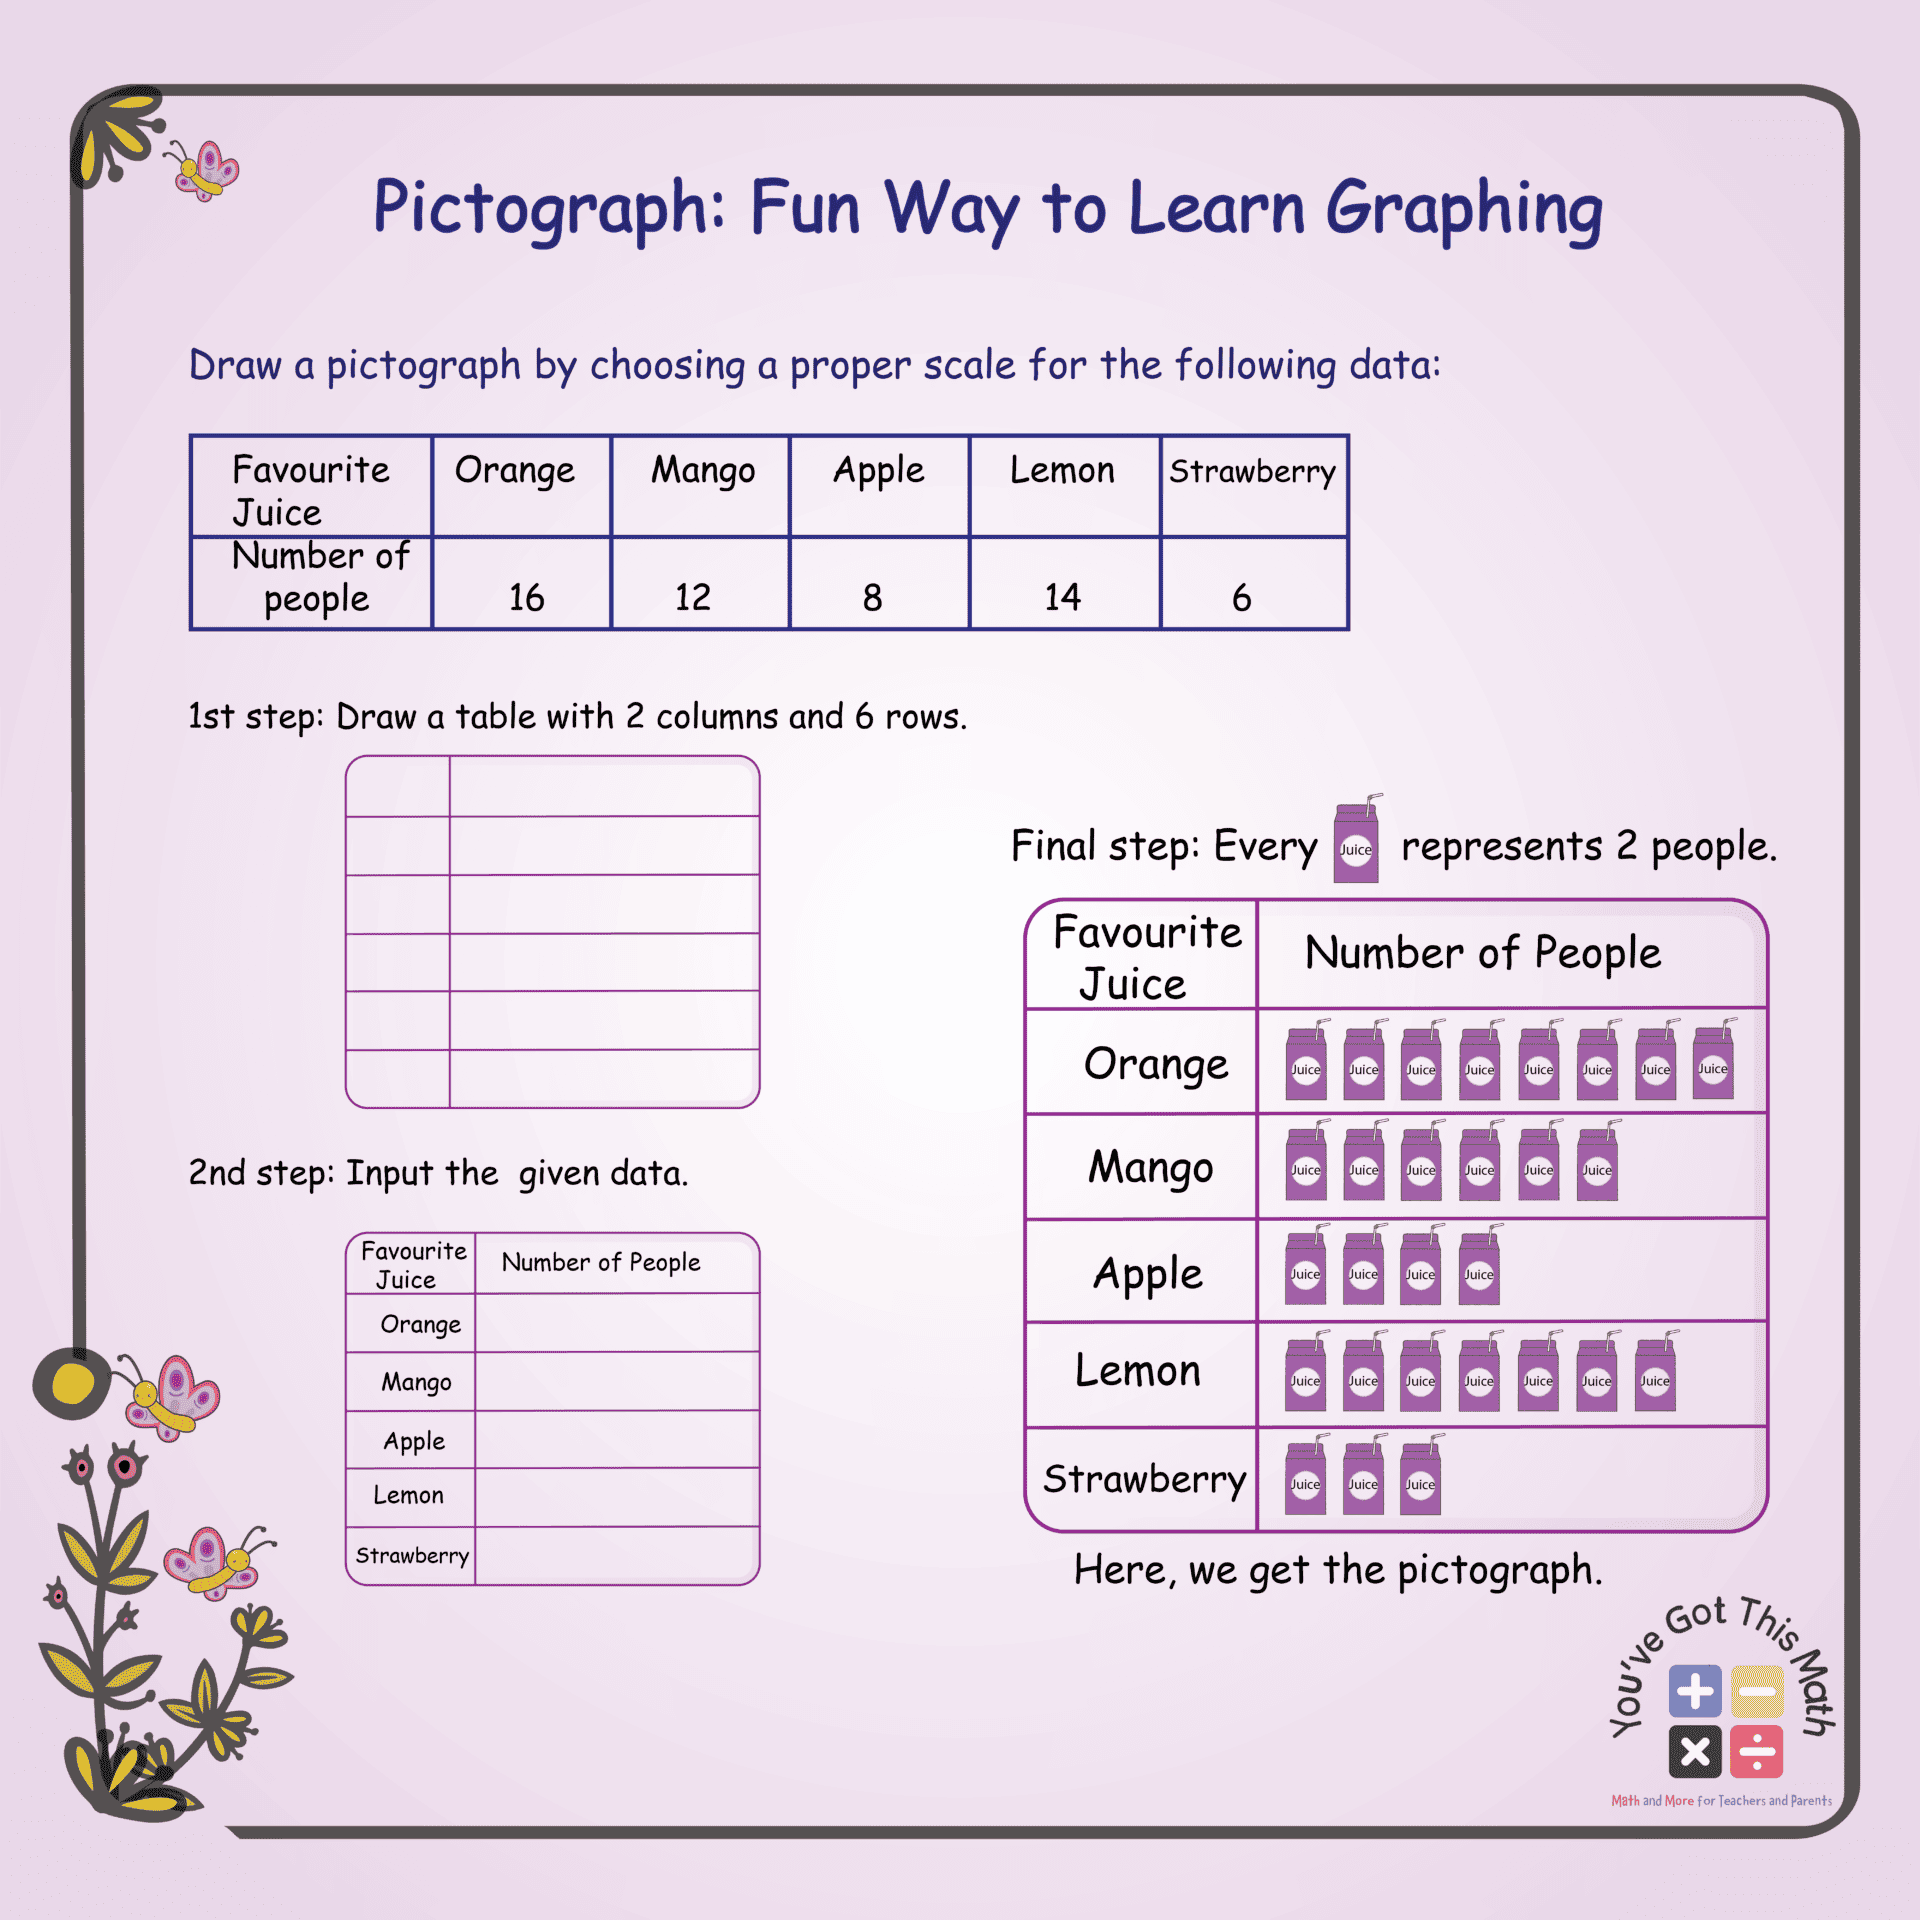 Pictograph Fun Way to Learn Graphing